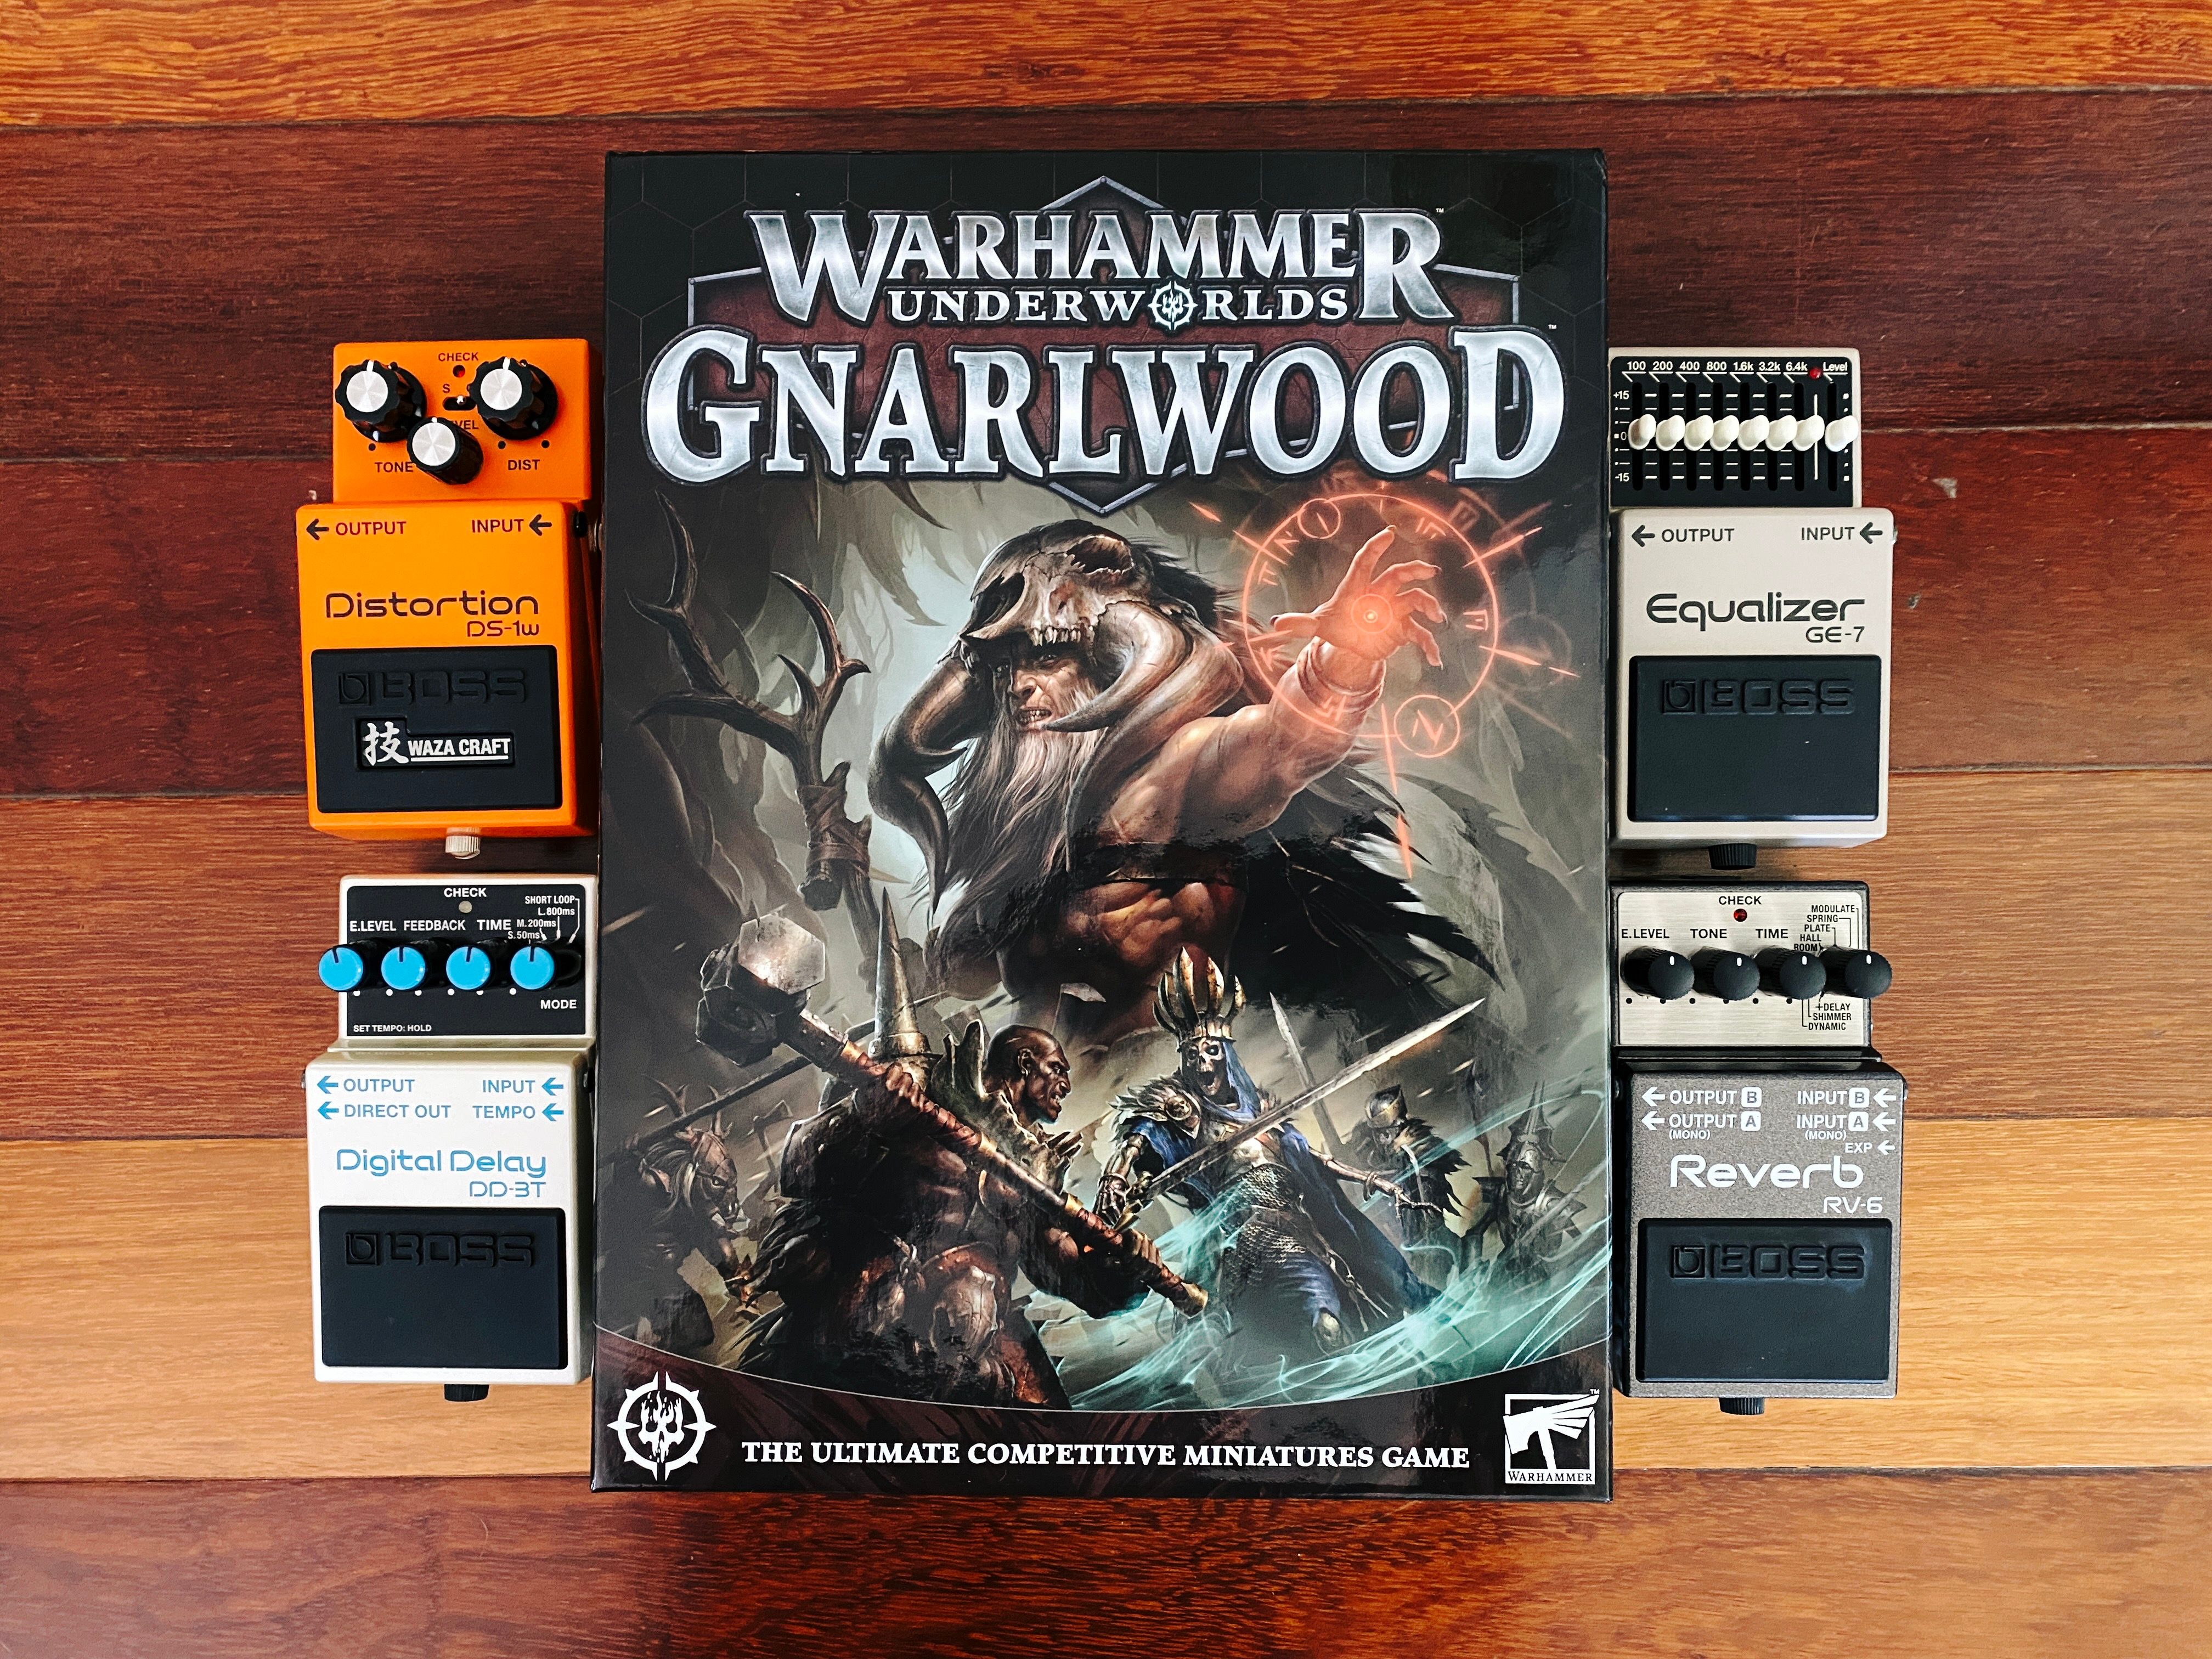 A photo of the box of Games Workshop's new Warhammer Underworlds box, "Gnarlwood", and four Boss guitar pedals. The Underworlds box has artwork of a guy in furs and looking very shamanic, and the guitar pedals are the DS-1W distortion, DD-3T digital delay, GE-7 equaliser, and Reverb RV-6.